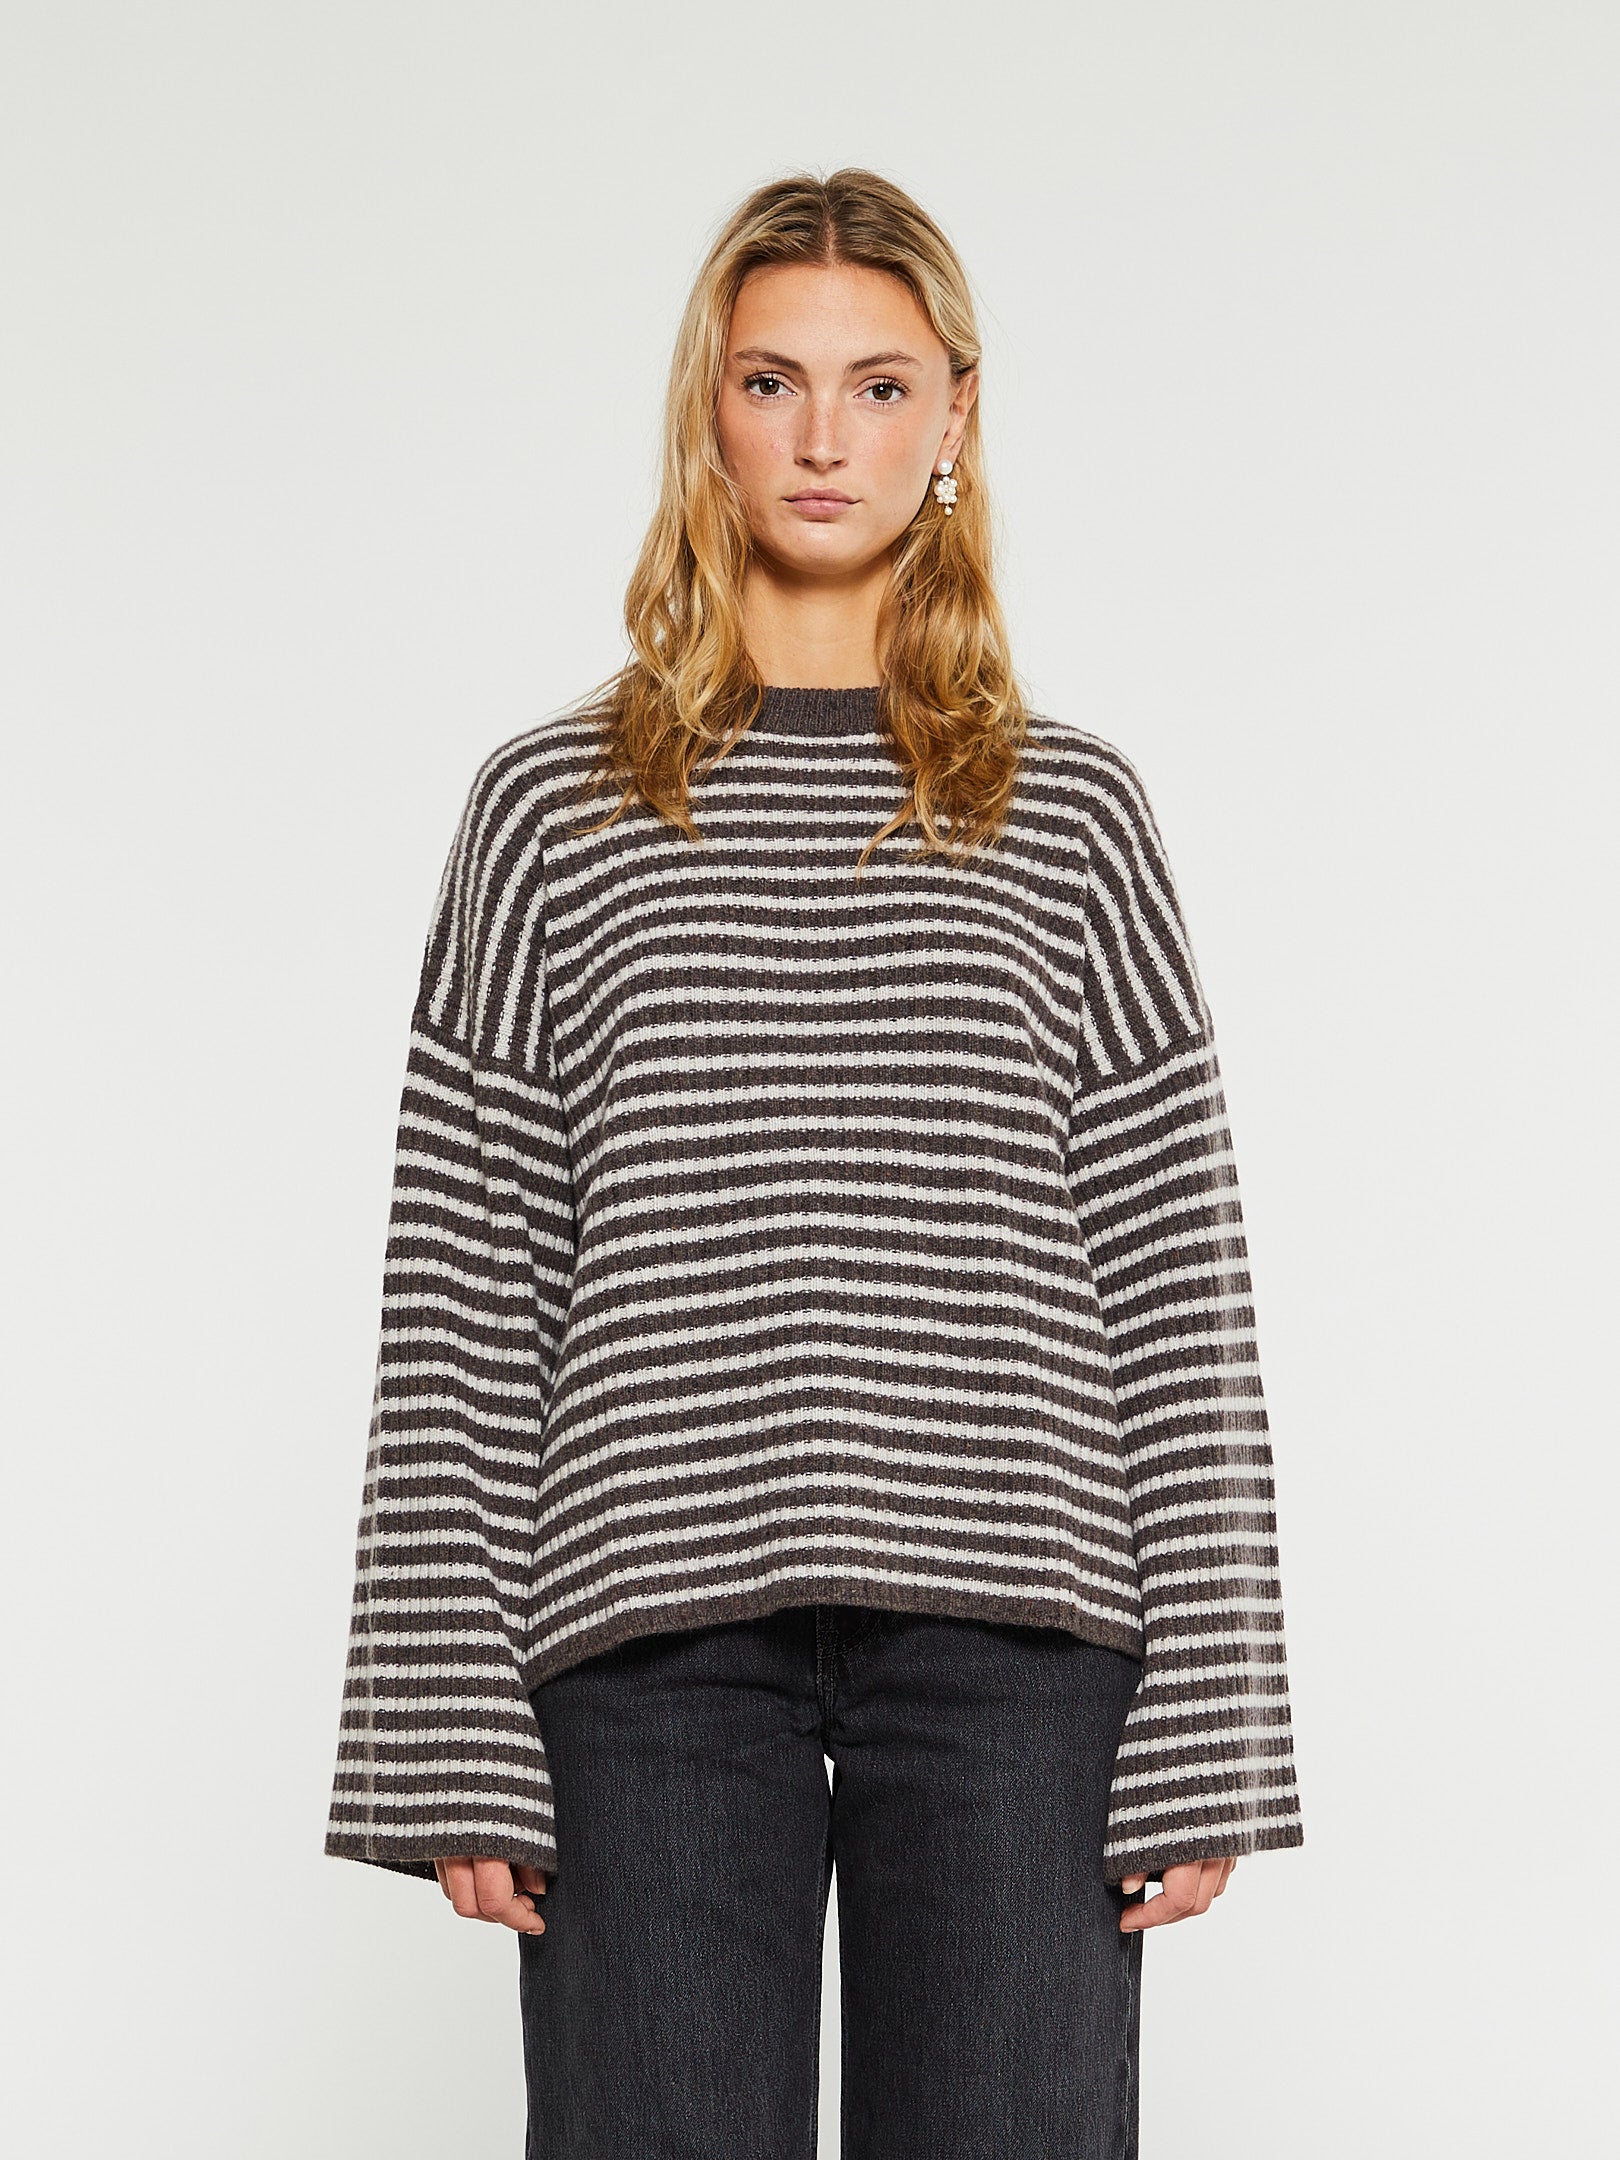 Knitwear | See the wide stoy – – selection STOY Page at